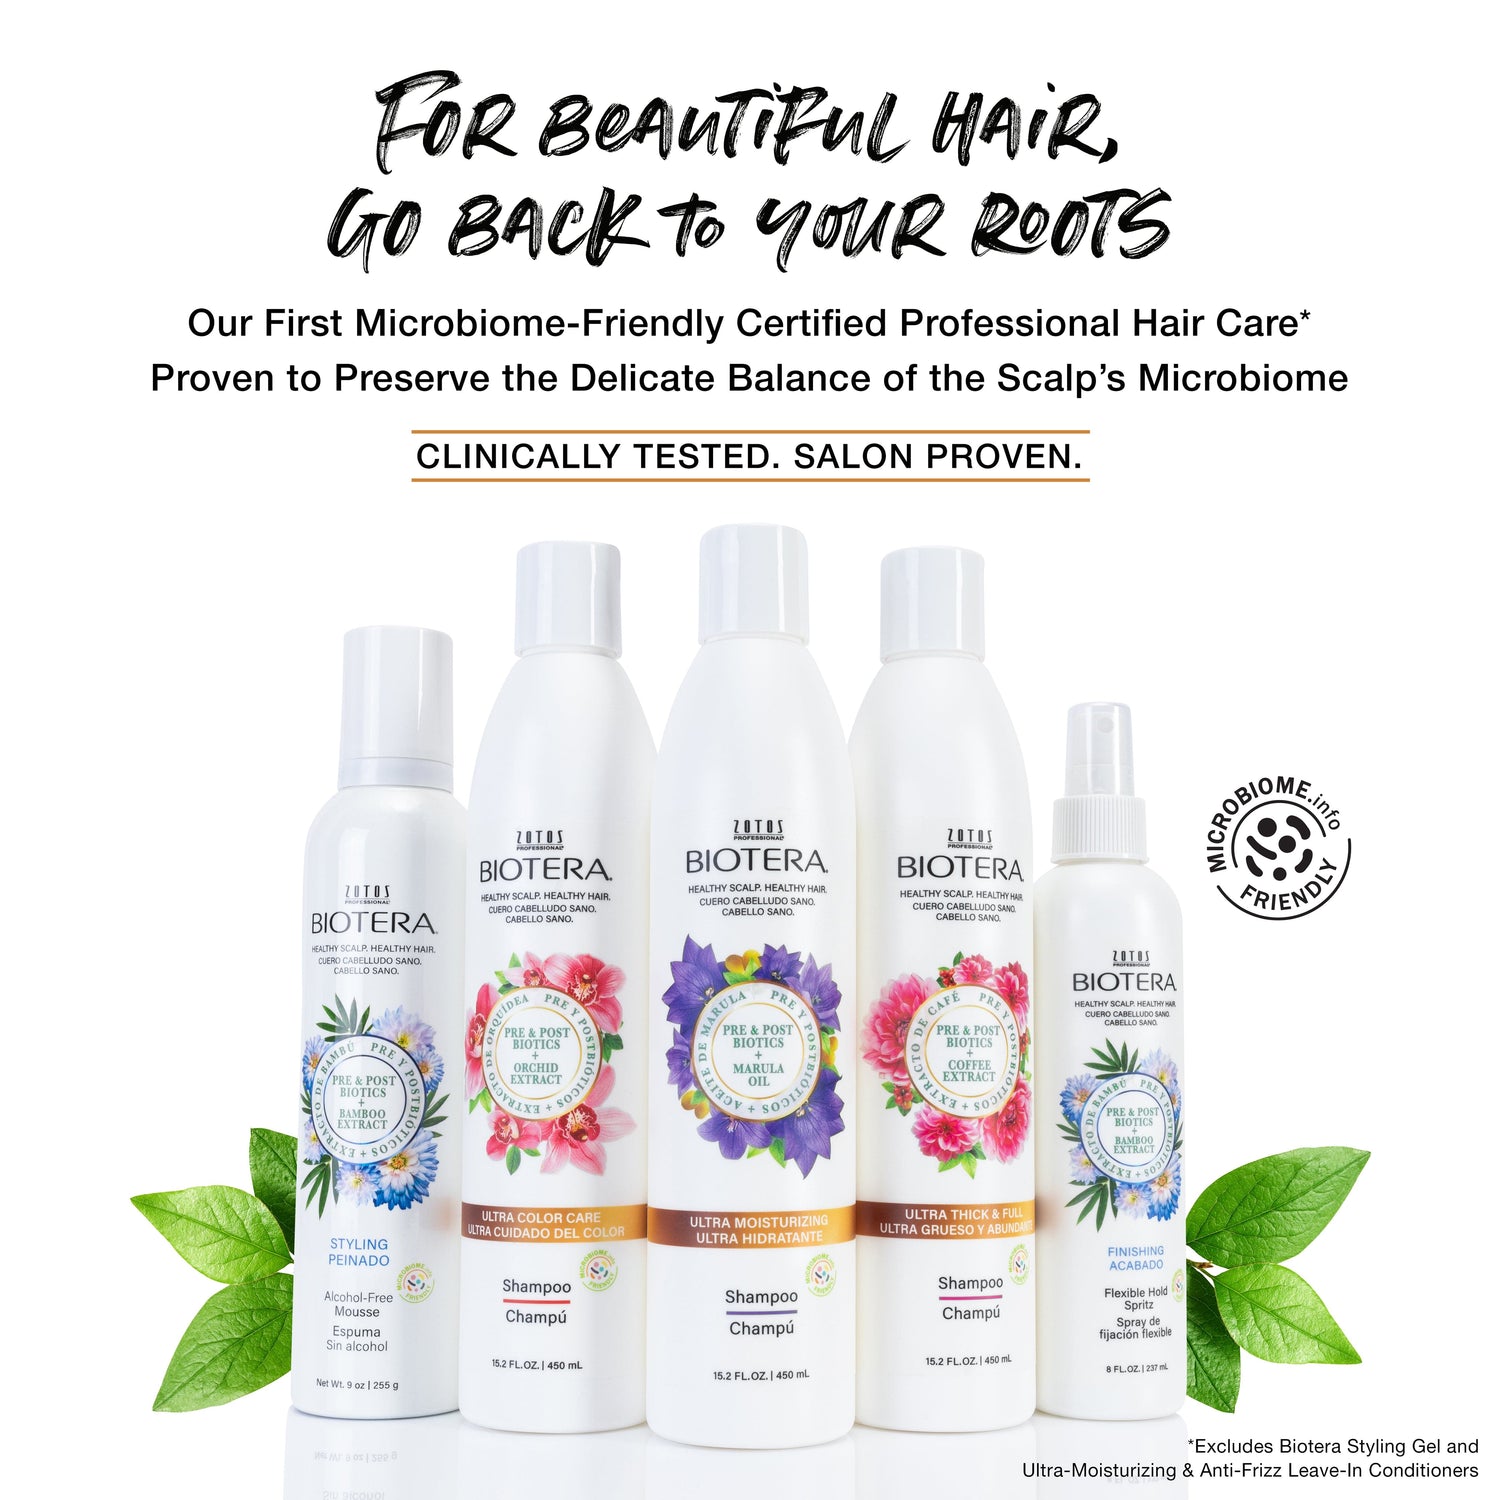 For beautiful hair, go back to your roots. Biotera is Zotos Professional’s first microbiome-friendly certified professional hair care proven to preserve the delicate balance of the scalp's microbiome. Clinically tested, salon proven. Image of shampoos, conditioners and stylers. 